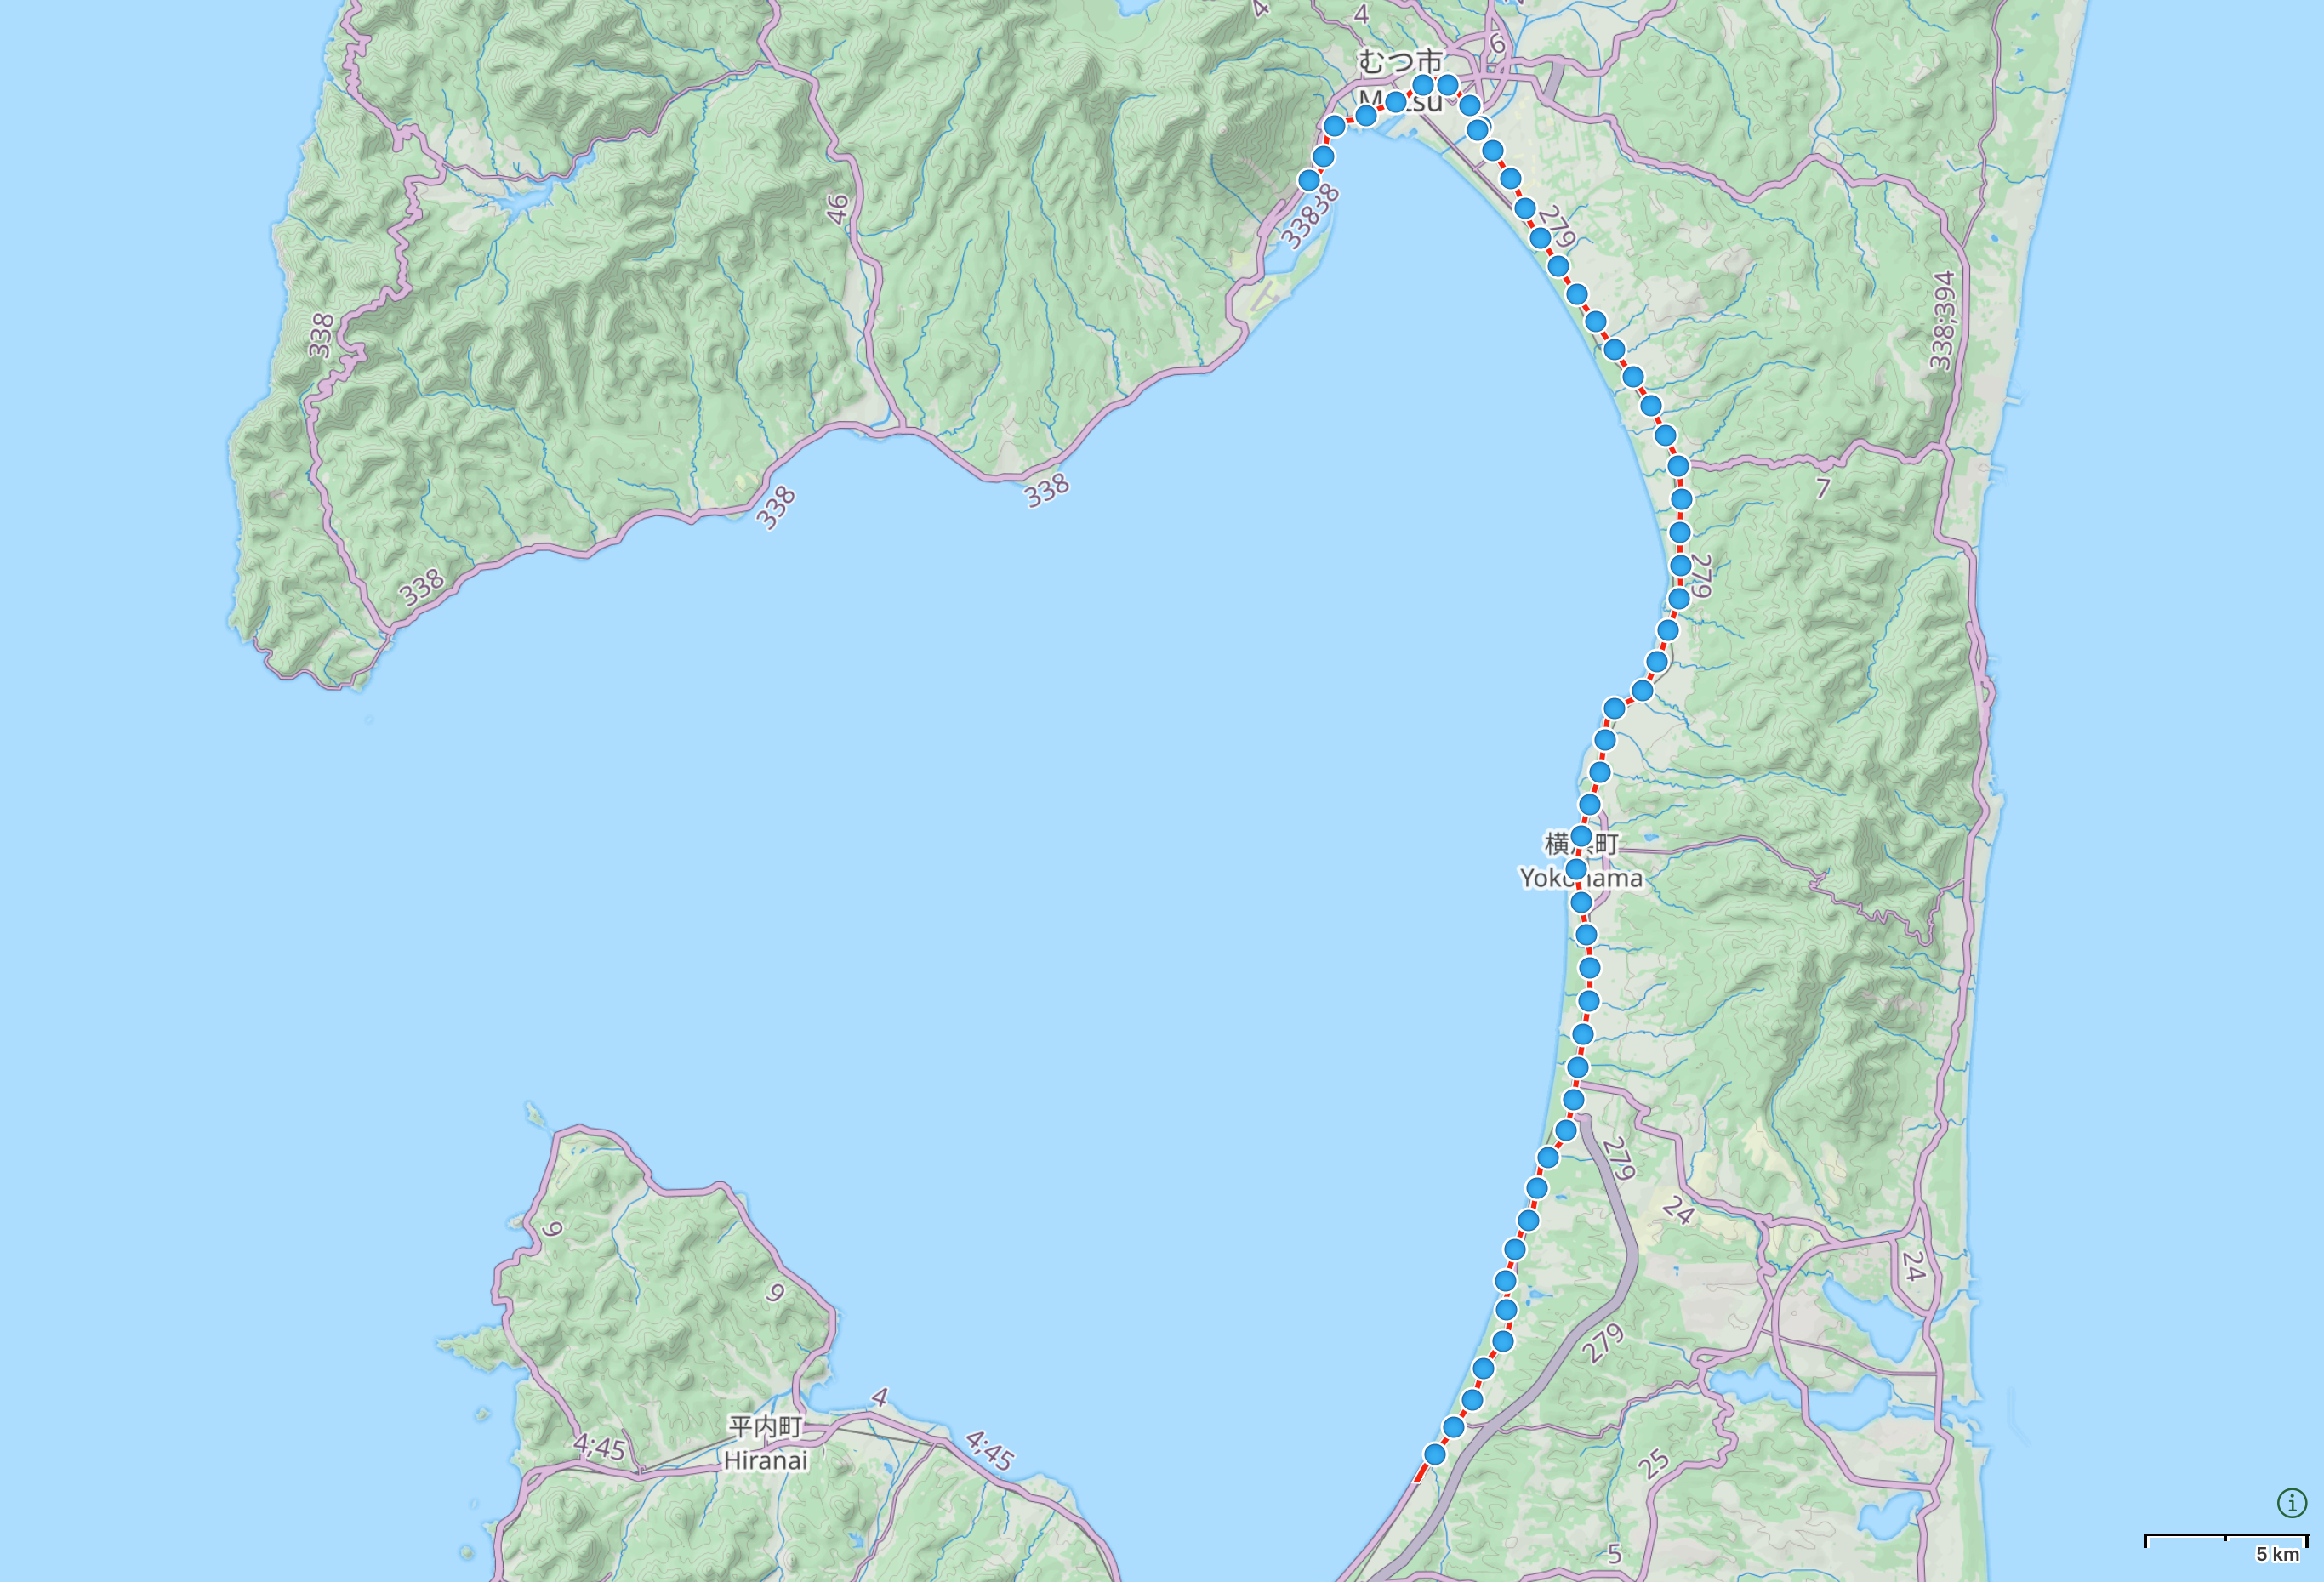 Map of Aomori prefecture with author’s route from Noheji to Mutsu highlighted.